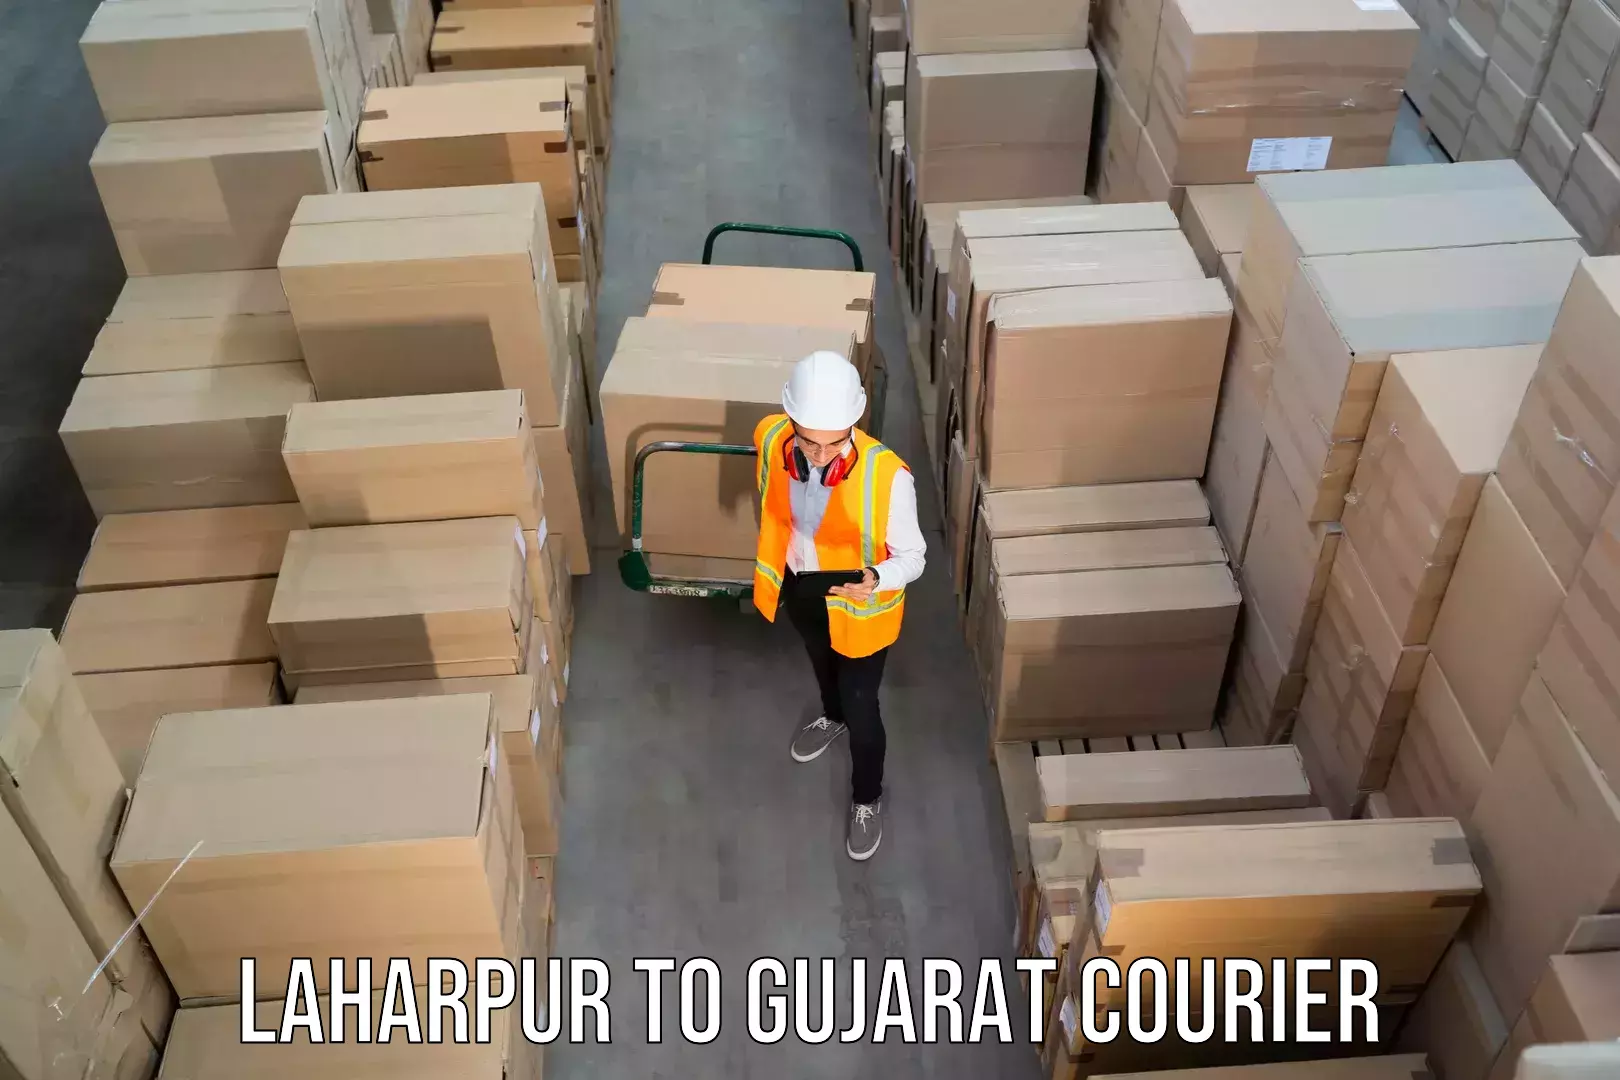 Flexible delivery schedules Laharpur to Bhuj